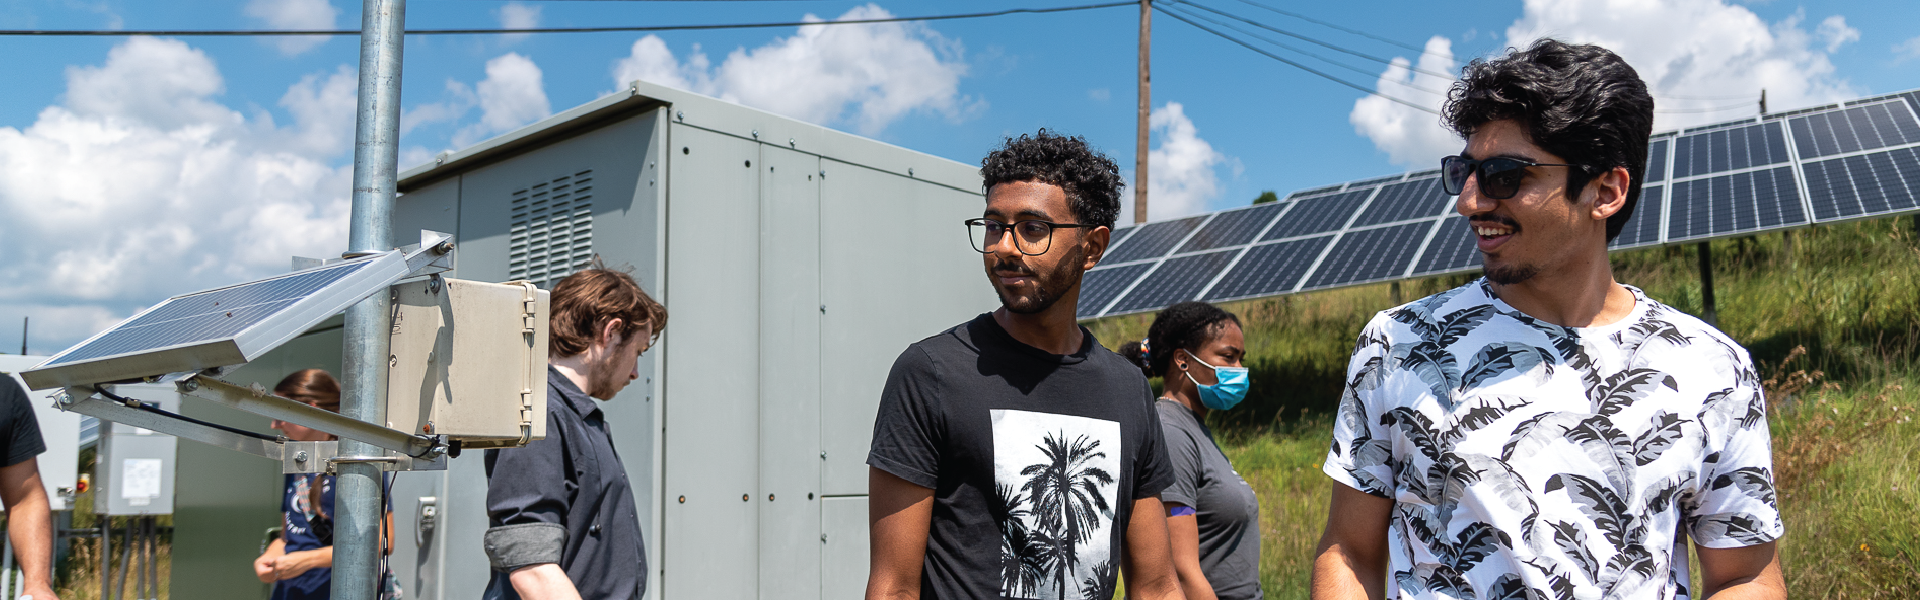 students smiling outside in solar panel field